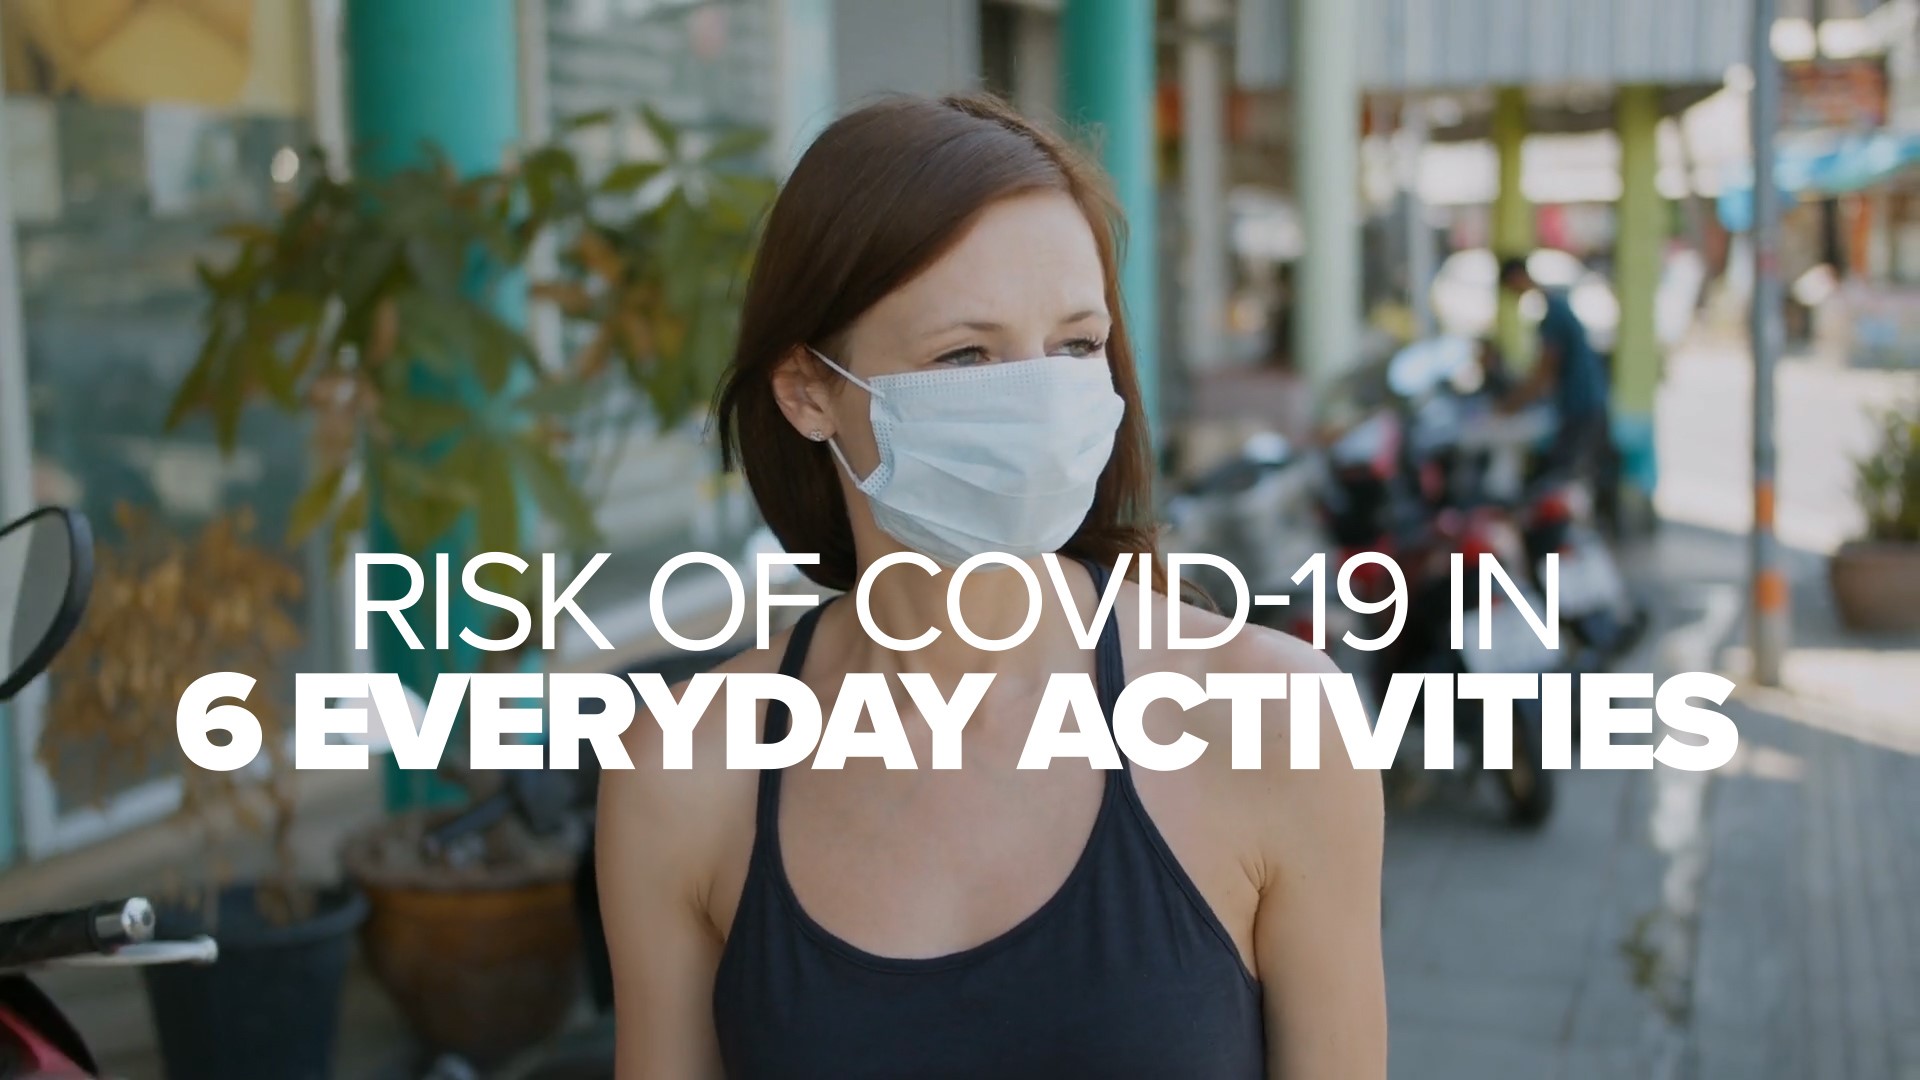 Here's the risk level for six everyday activities during the coronavirus pandemic according to experts